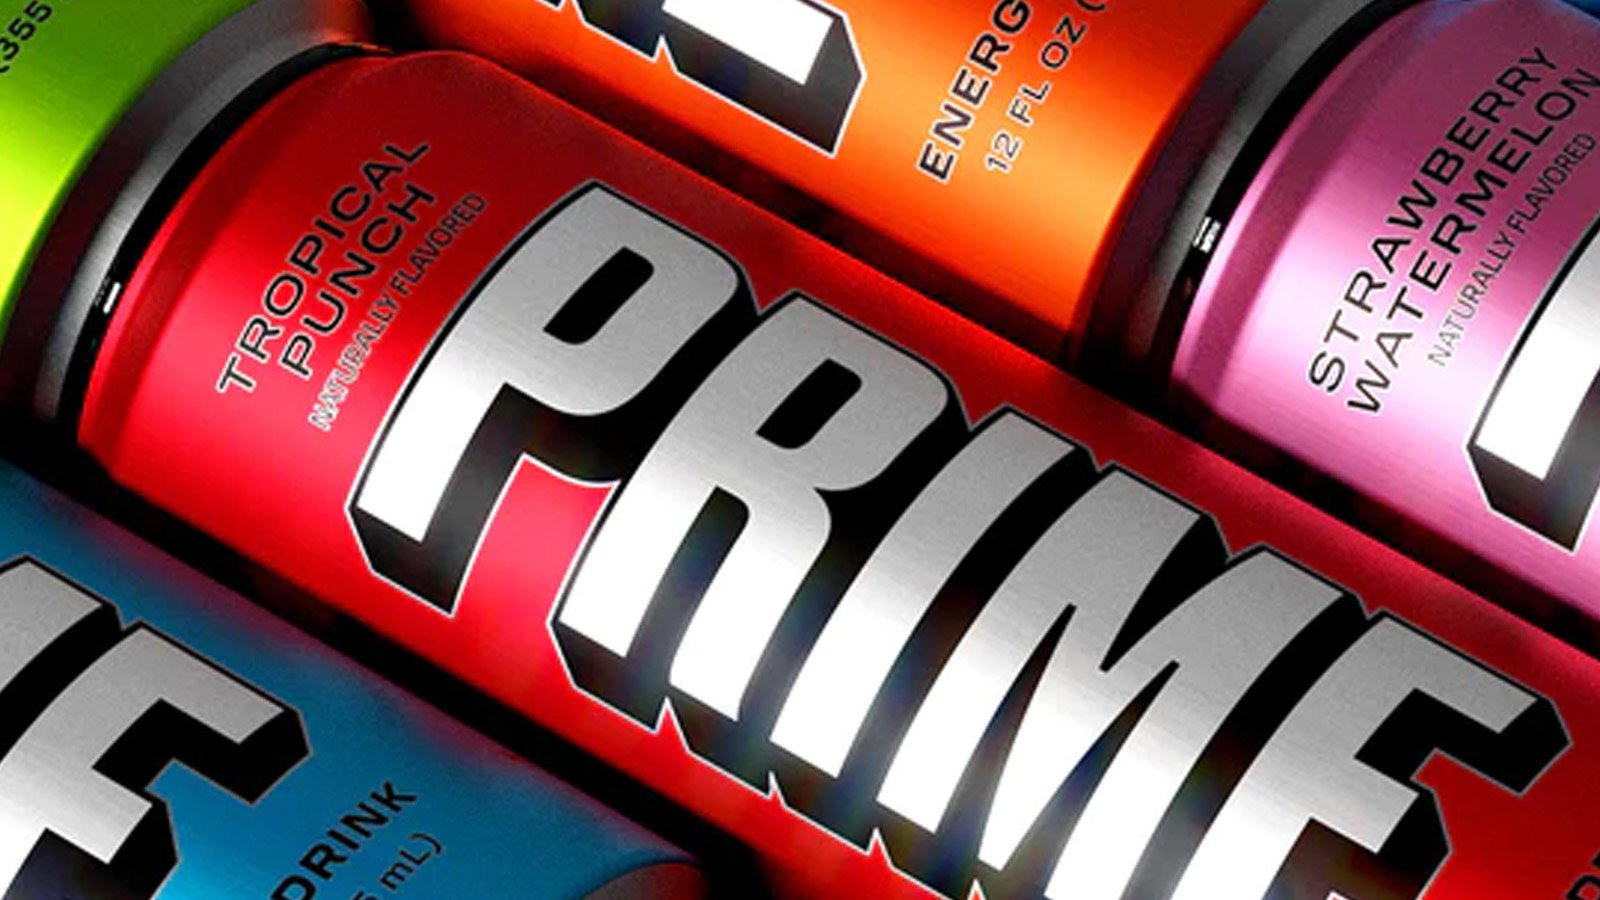 School warns parents about Prime Energy after student's “cardiac episode”